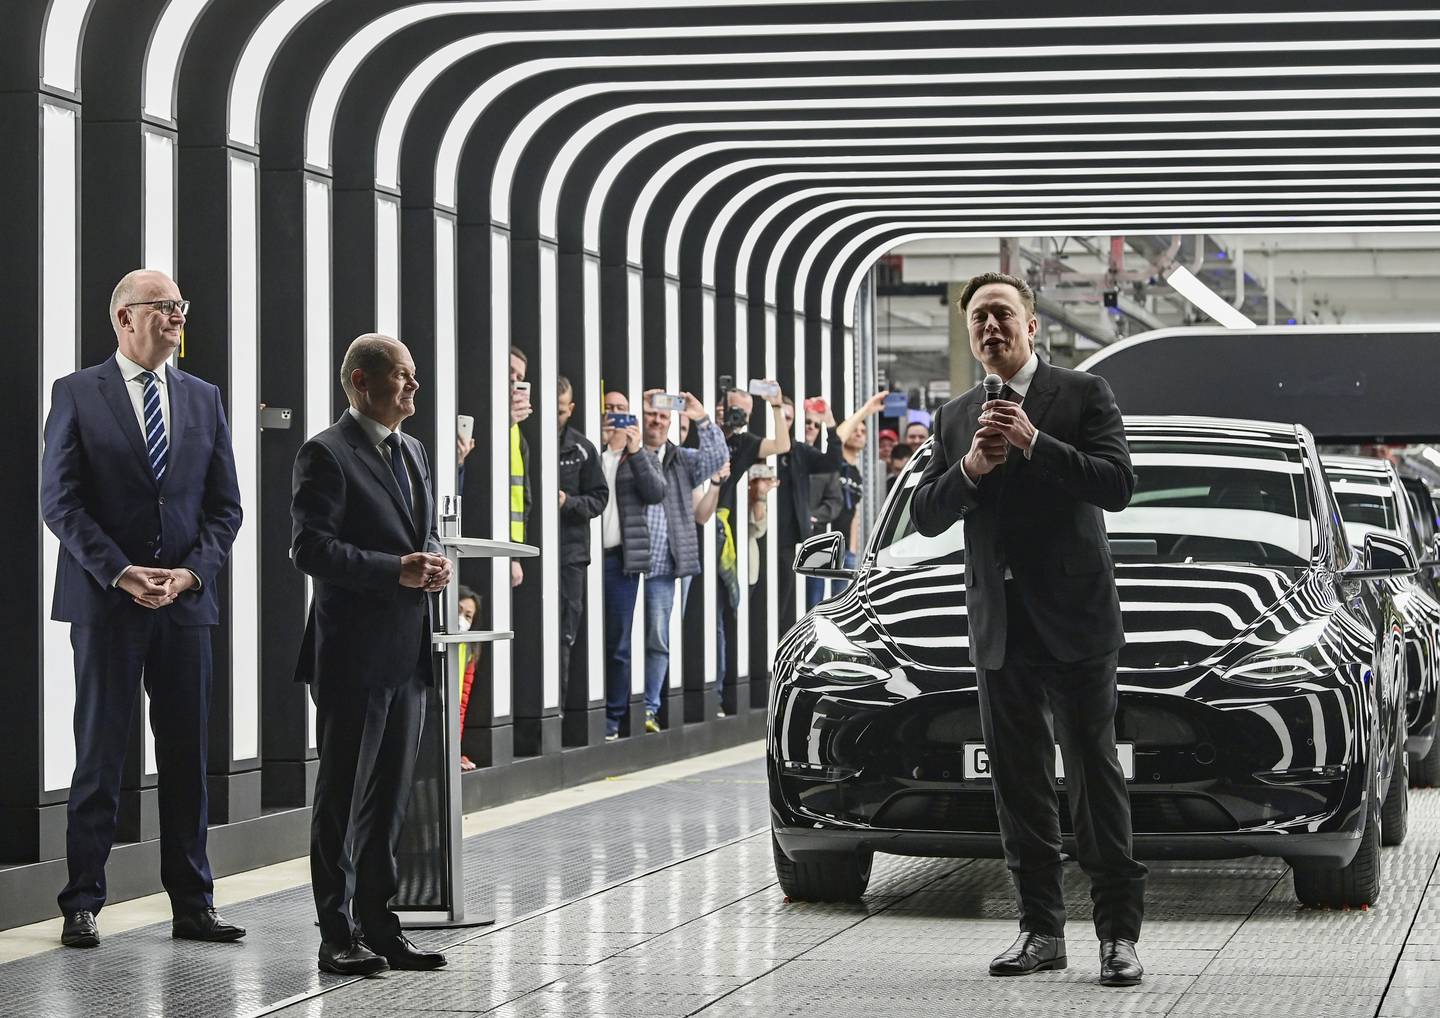 (L-R) Dietmar Woidke, Minister President of the State of Brandenburg, German Chancellor Olaf Scholz and Elon Musk attend the opening of the Tesla factory in Gruenheide, Germany. AP